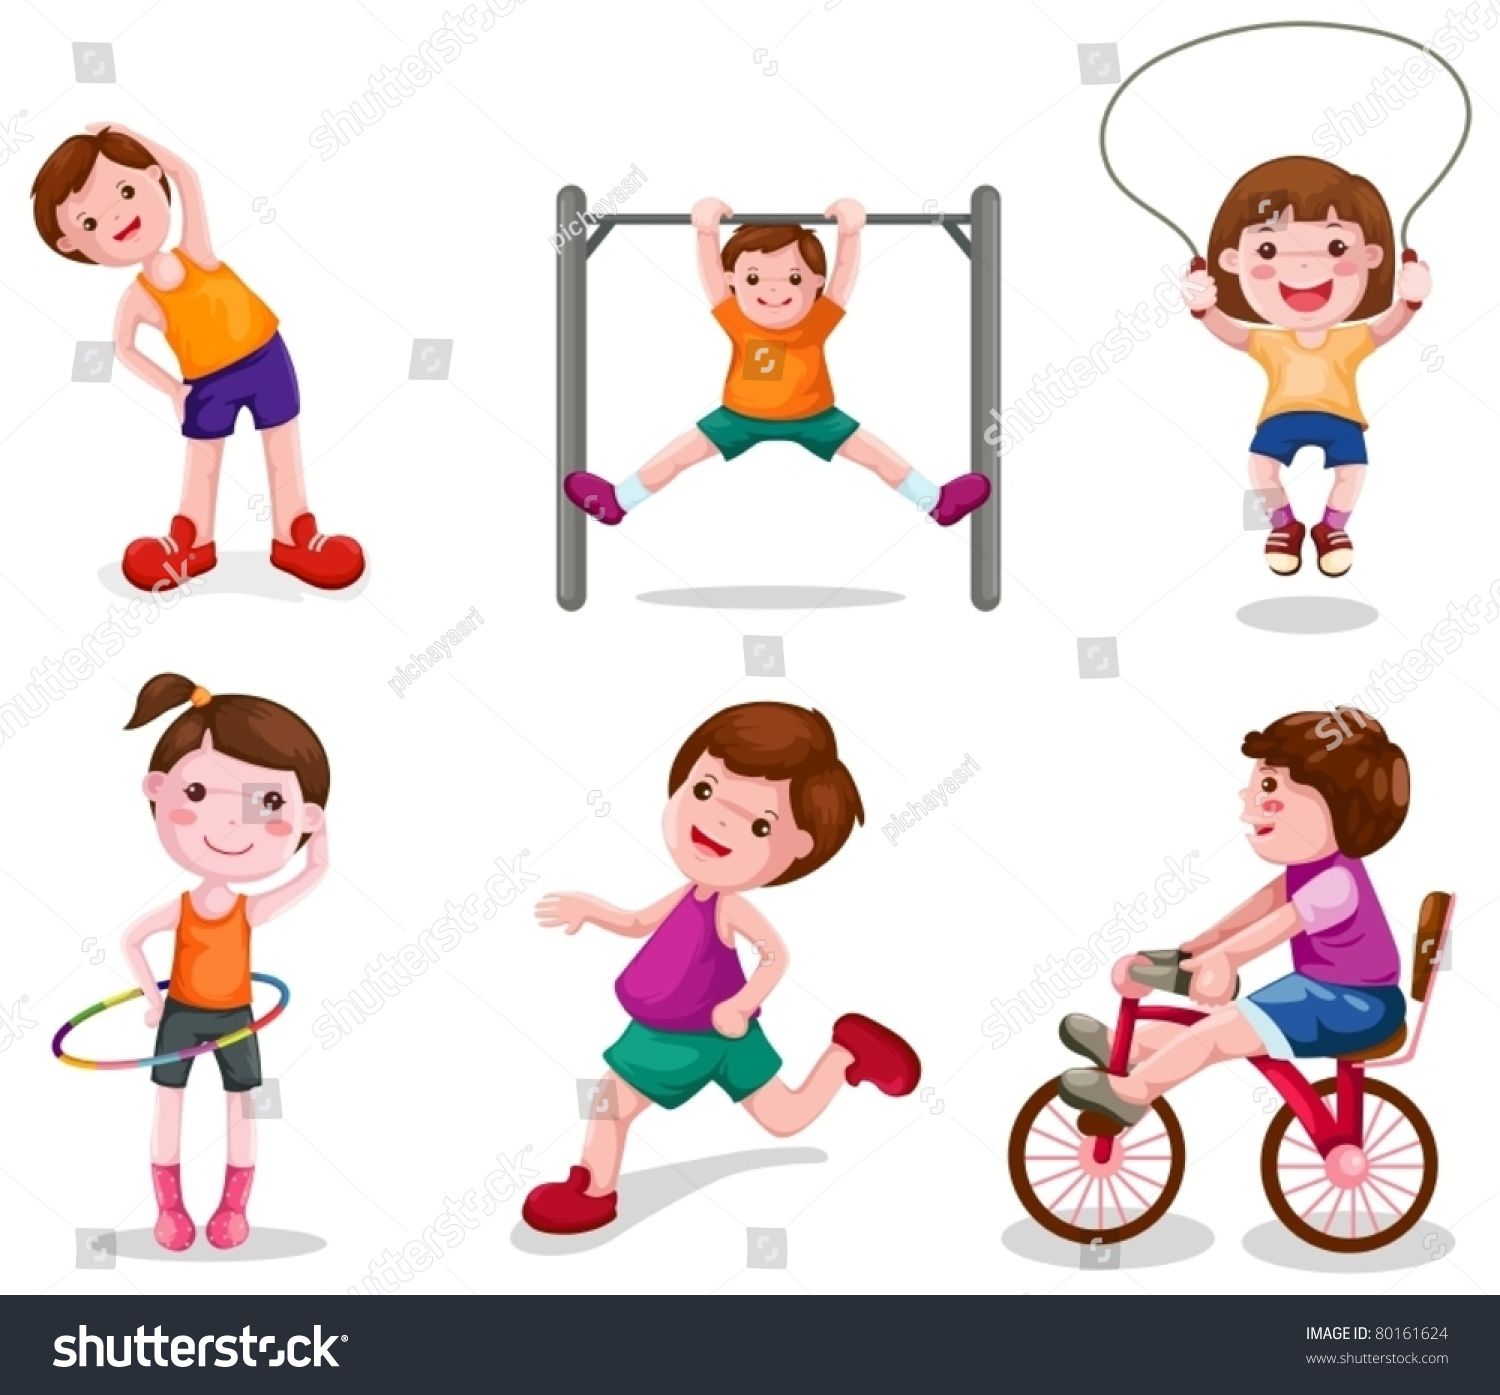 Exercise clipart physical.